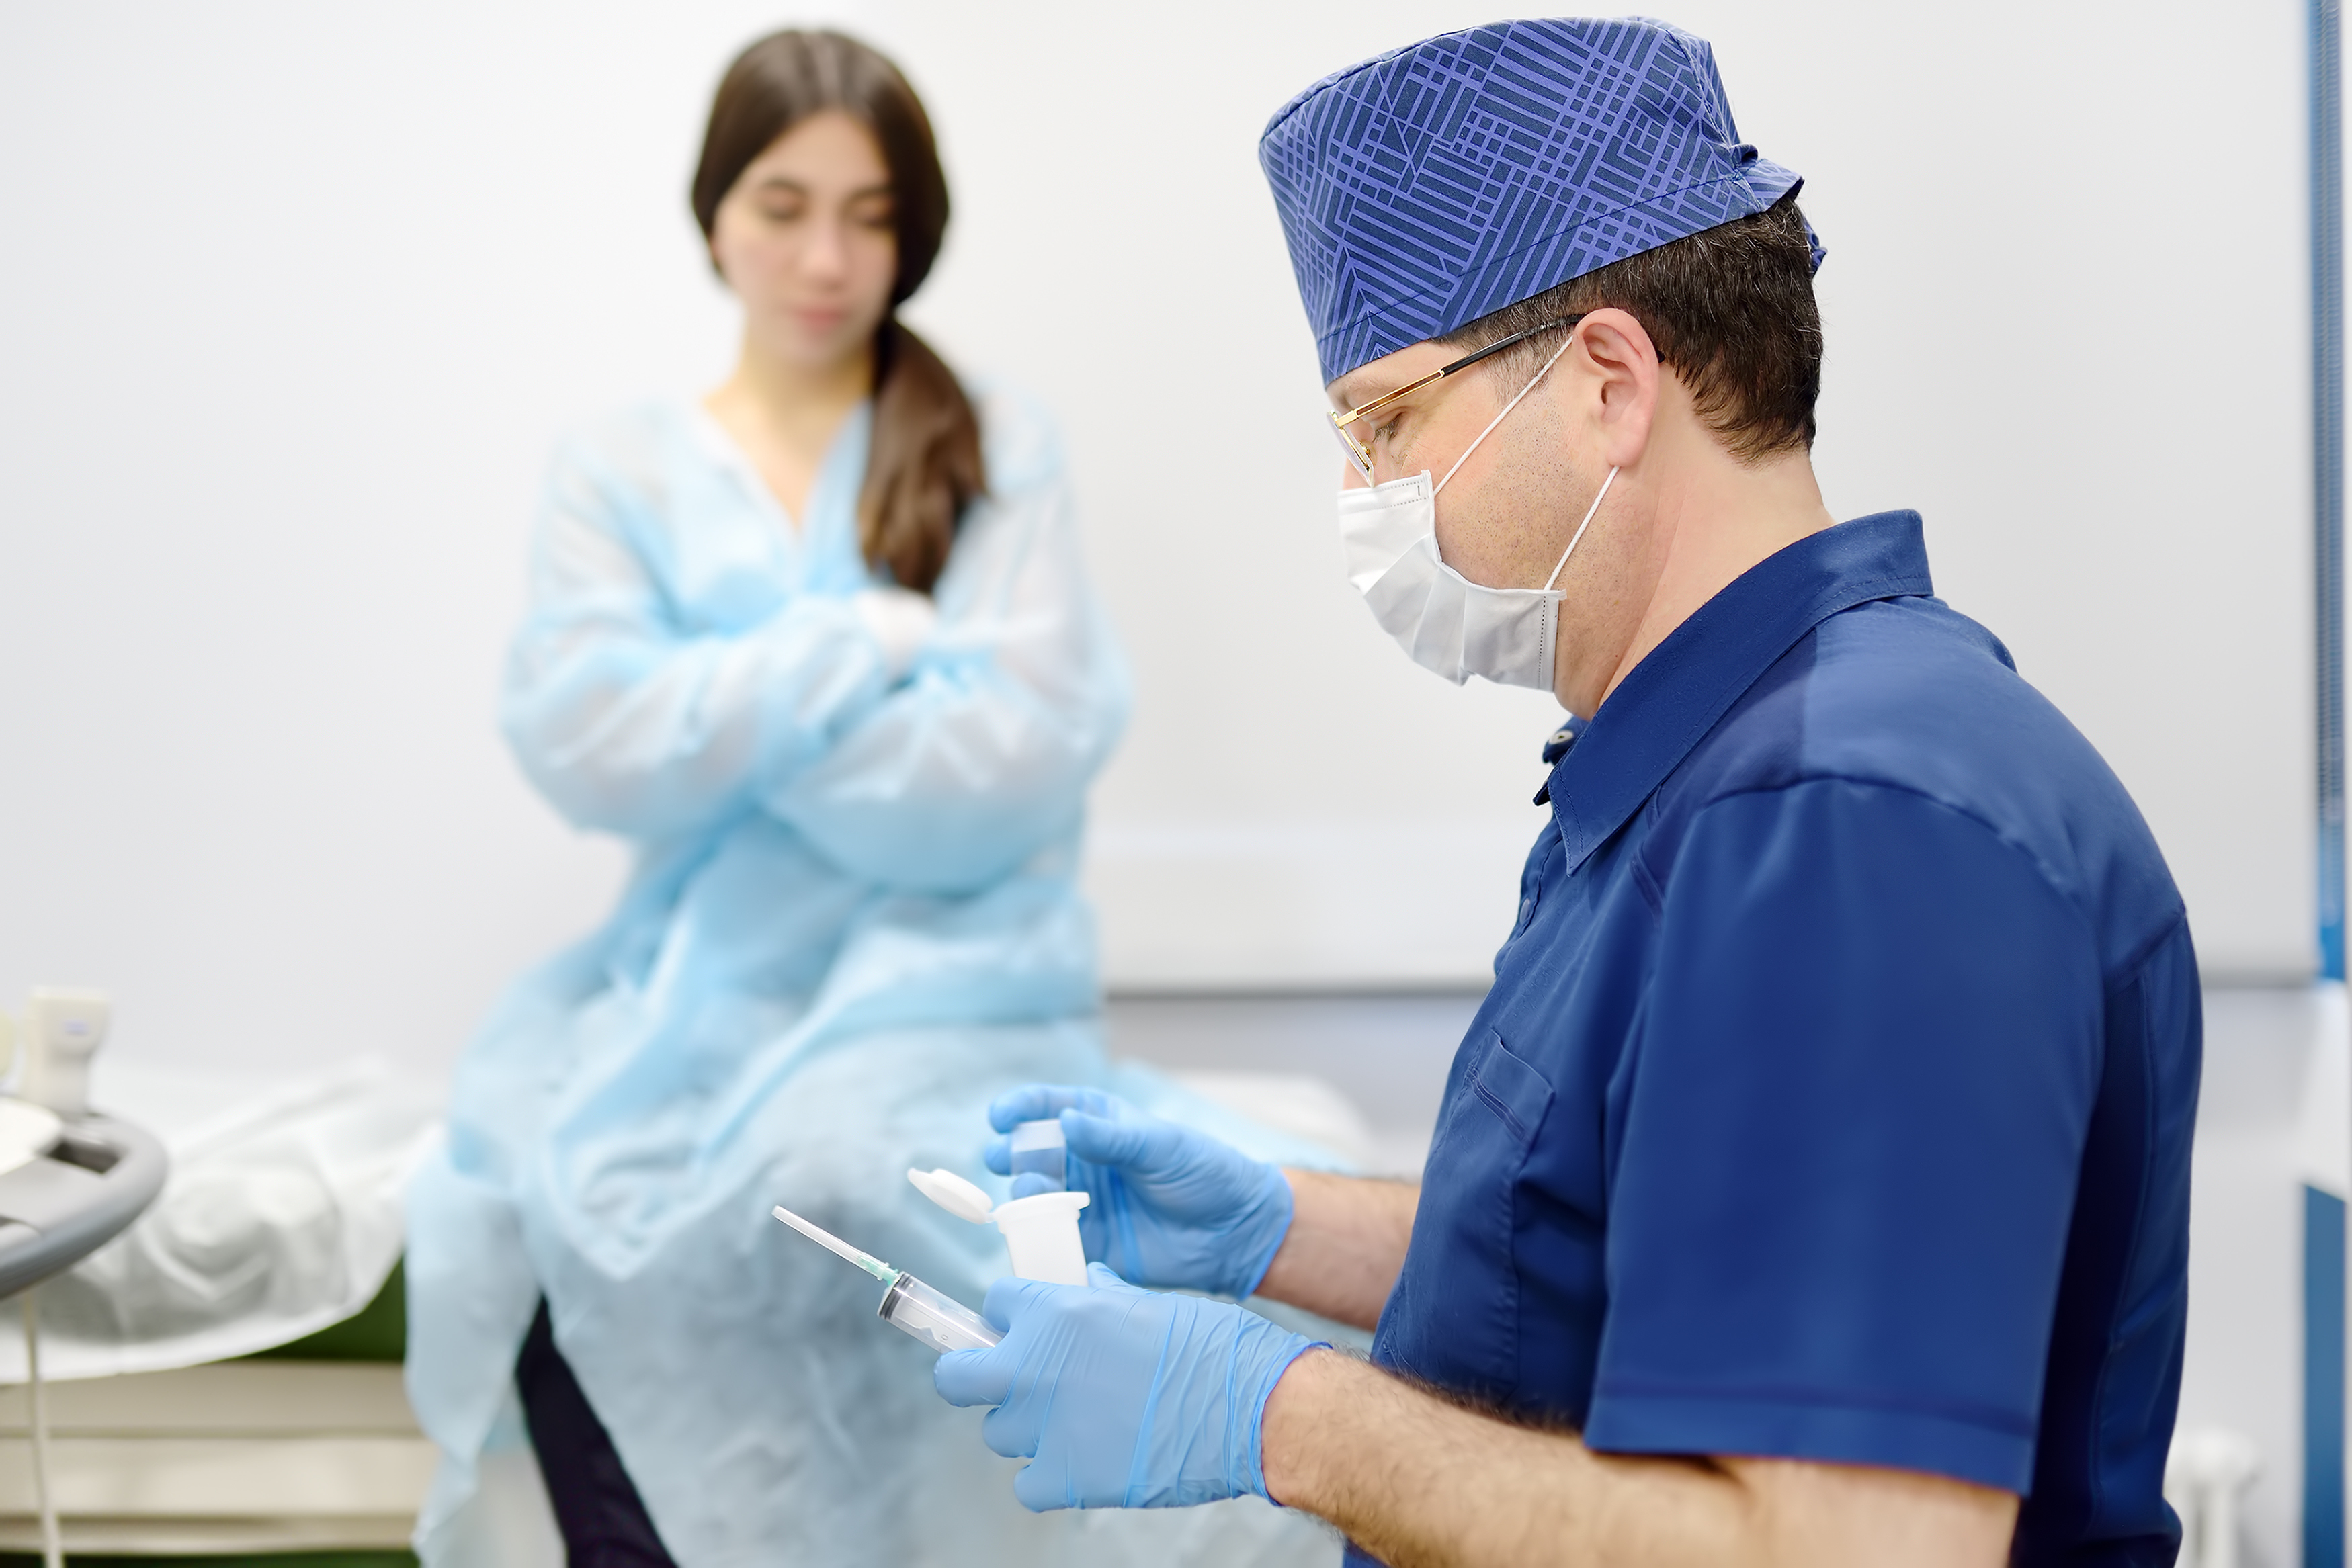 A doctor in scrubs prepares a syringe as a patient sits on the table